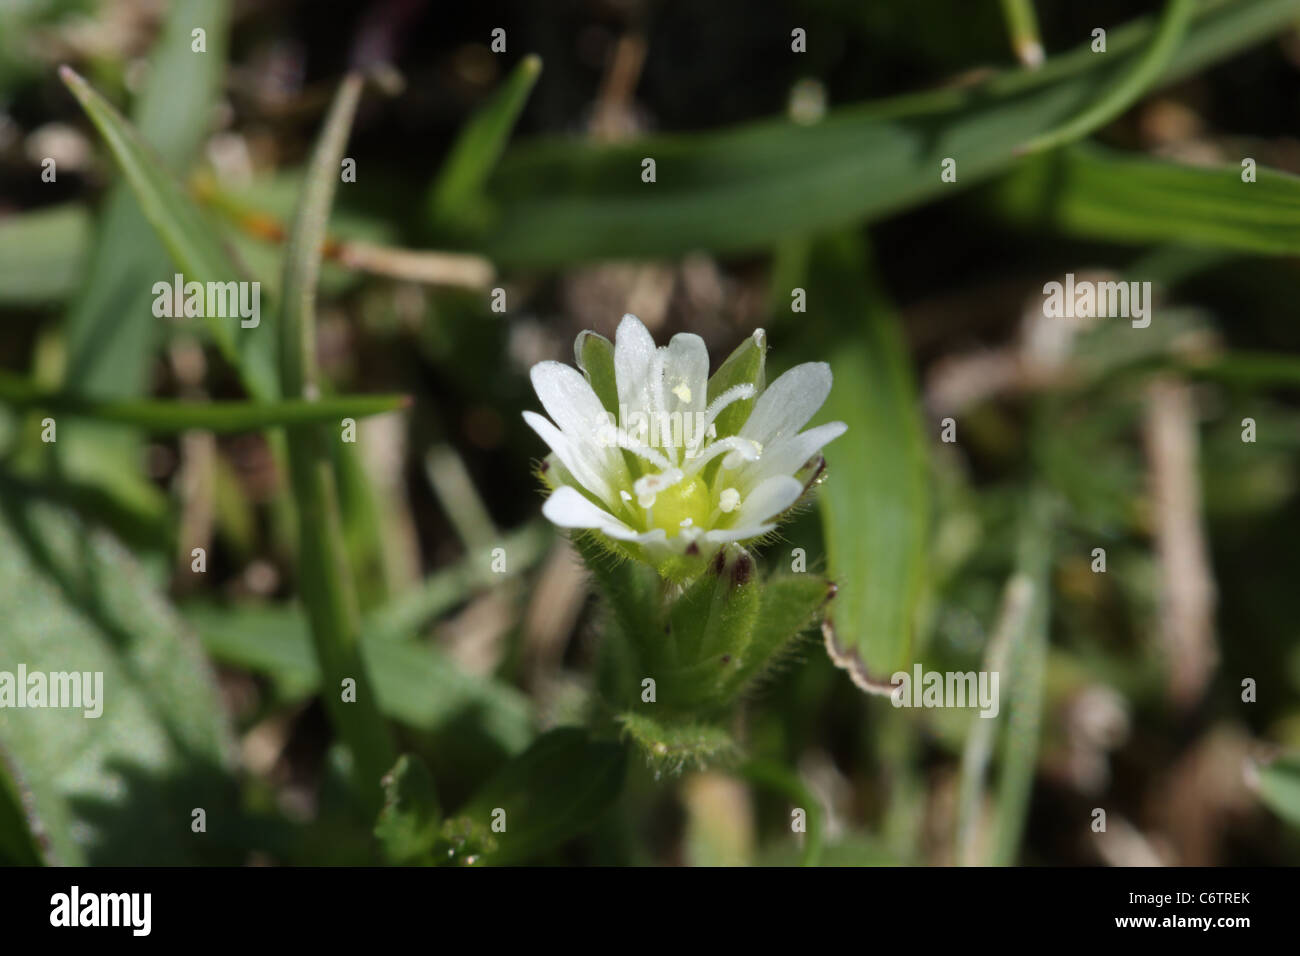 Common mouse-ear chickweed, Cerastium fontanum Stock Photo